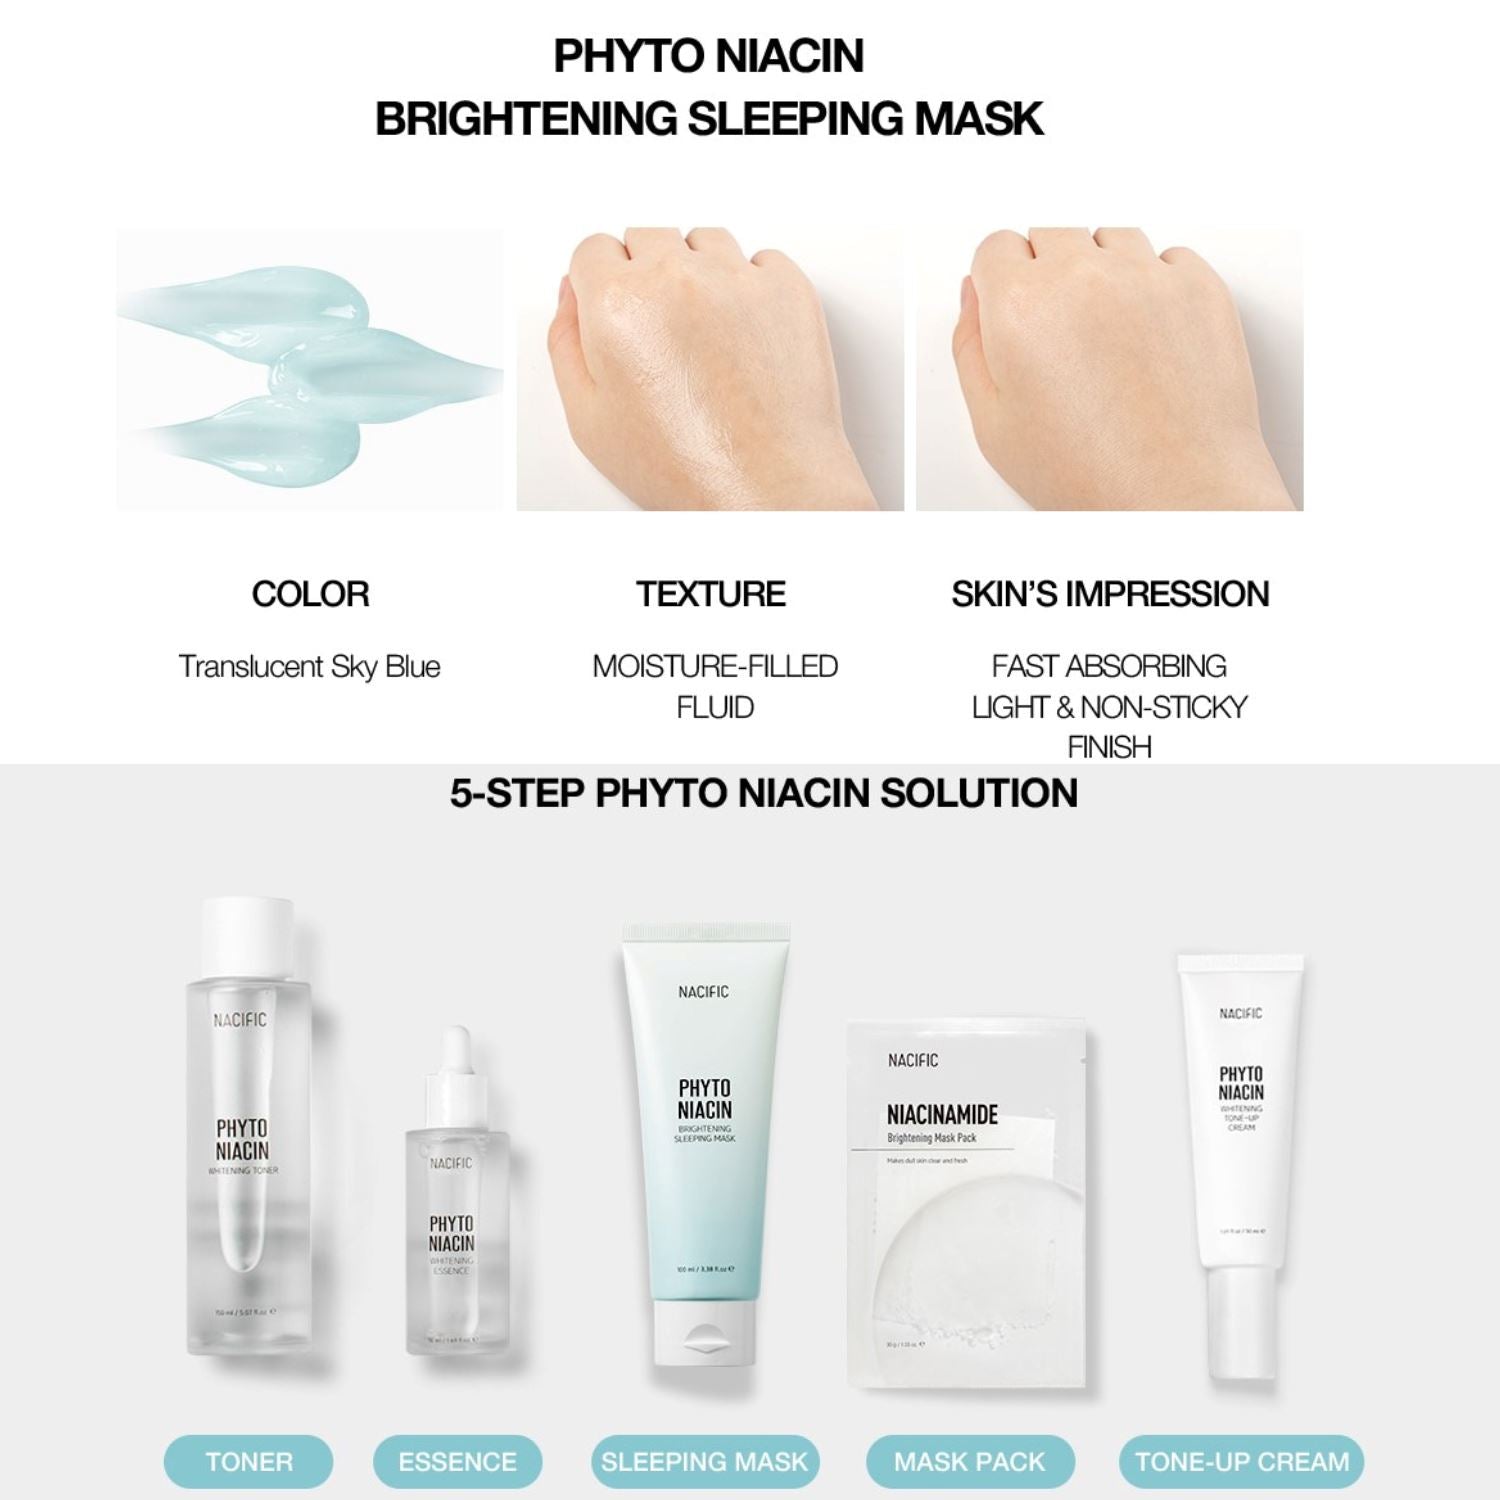 Nacific Phyto Niacin Brightening Sleeping Mask 100ml, at Orion Beauty. Nacific Official Sole Authorized Retailer in Sri Lanka!